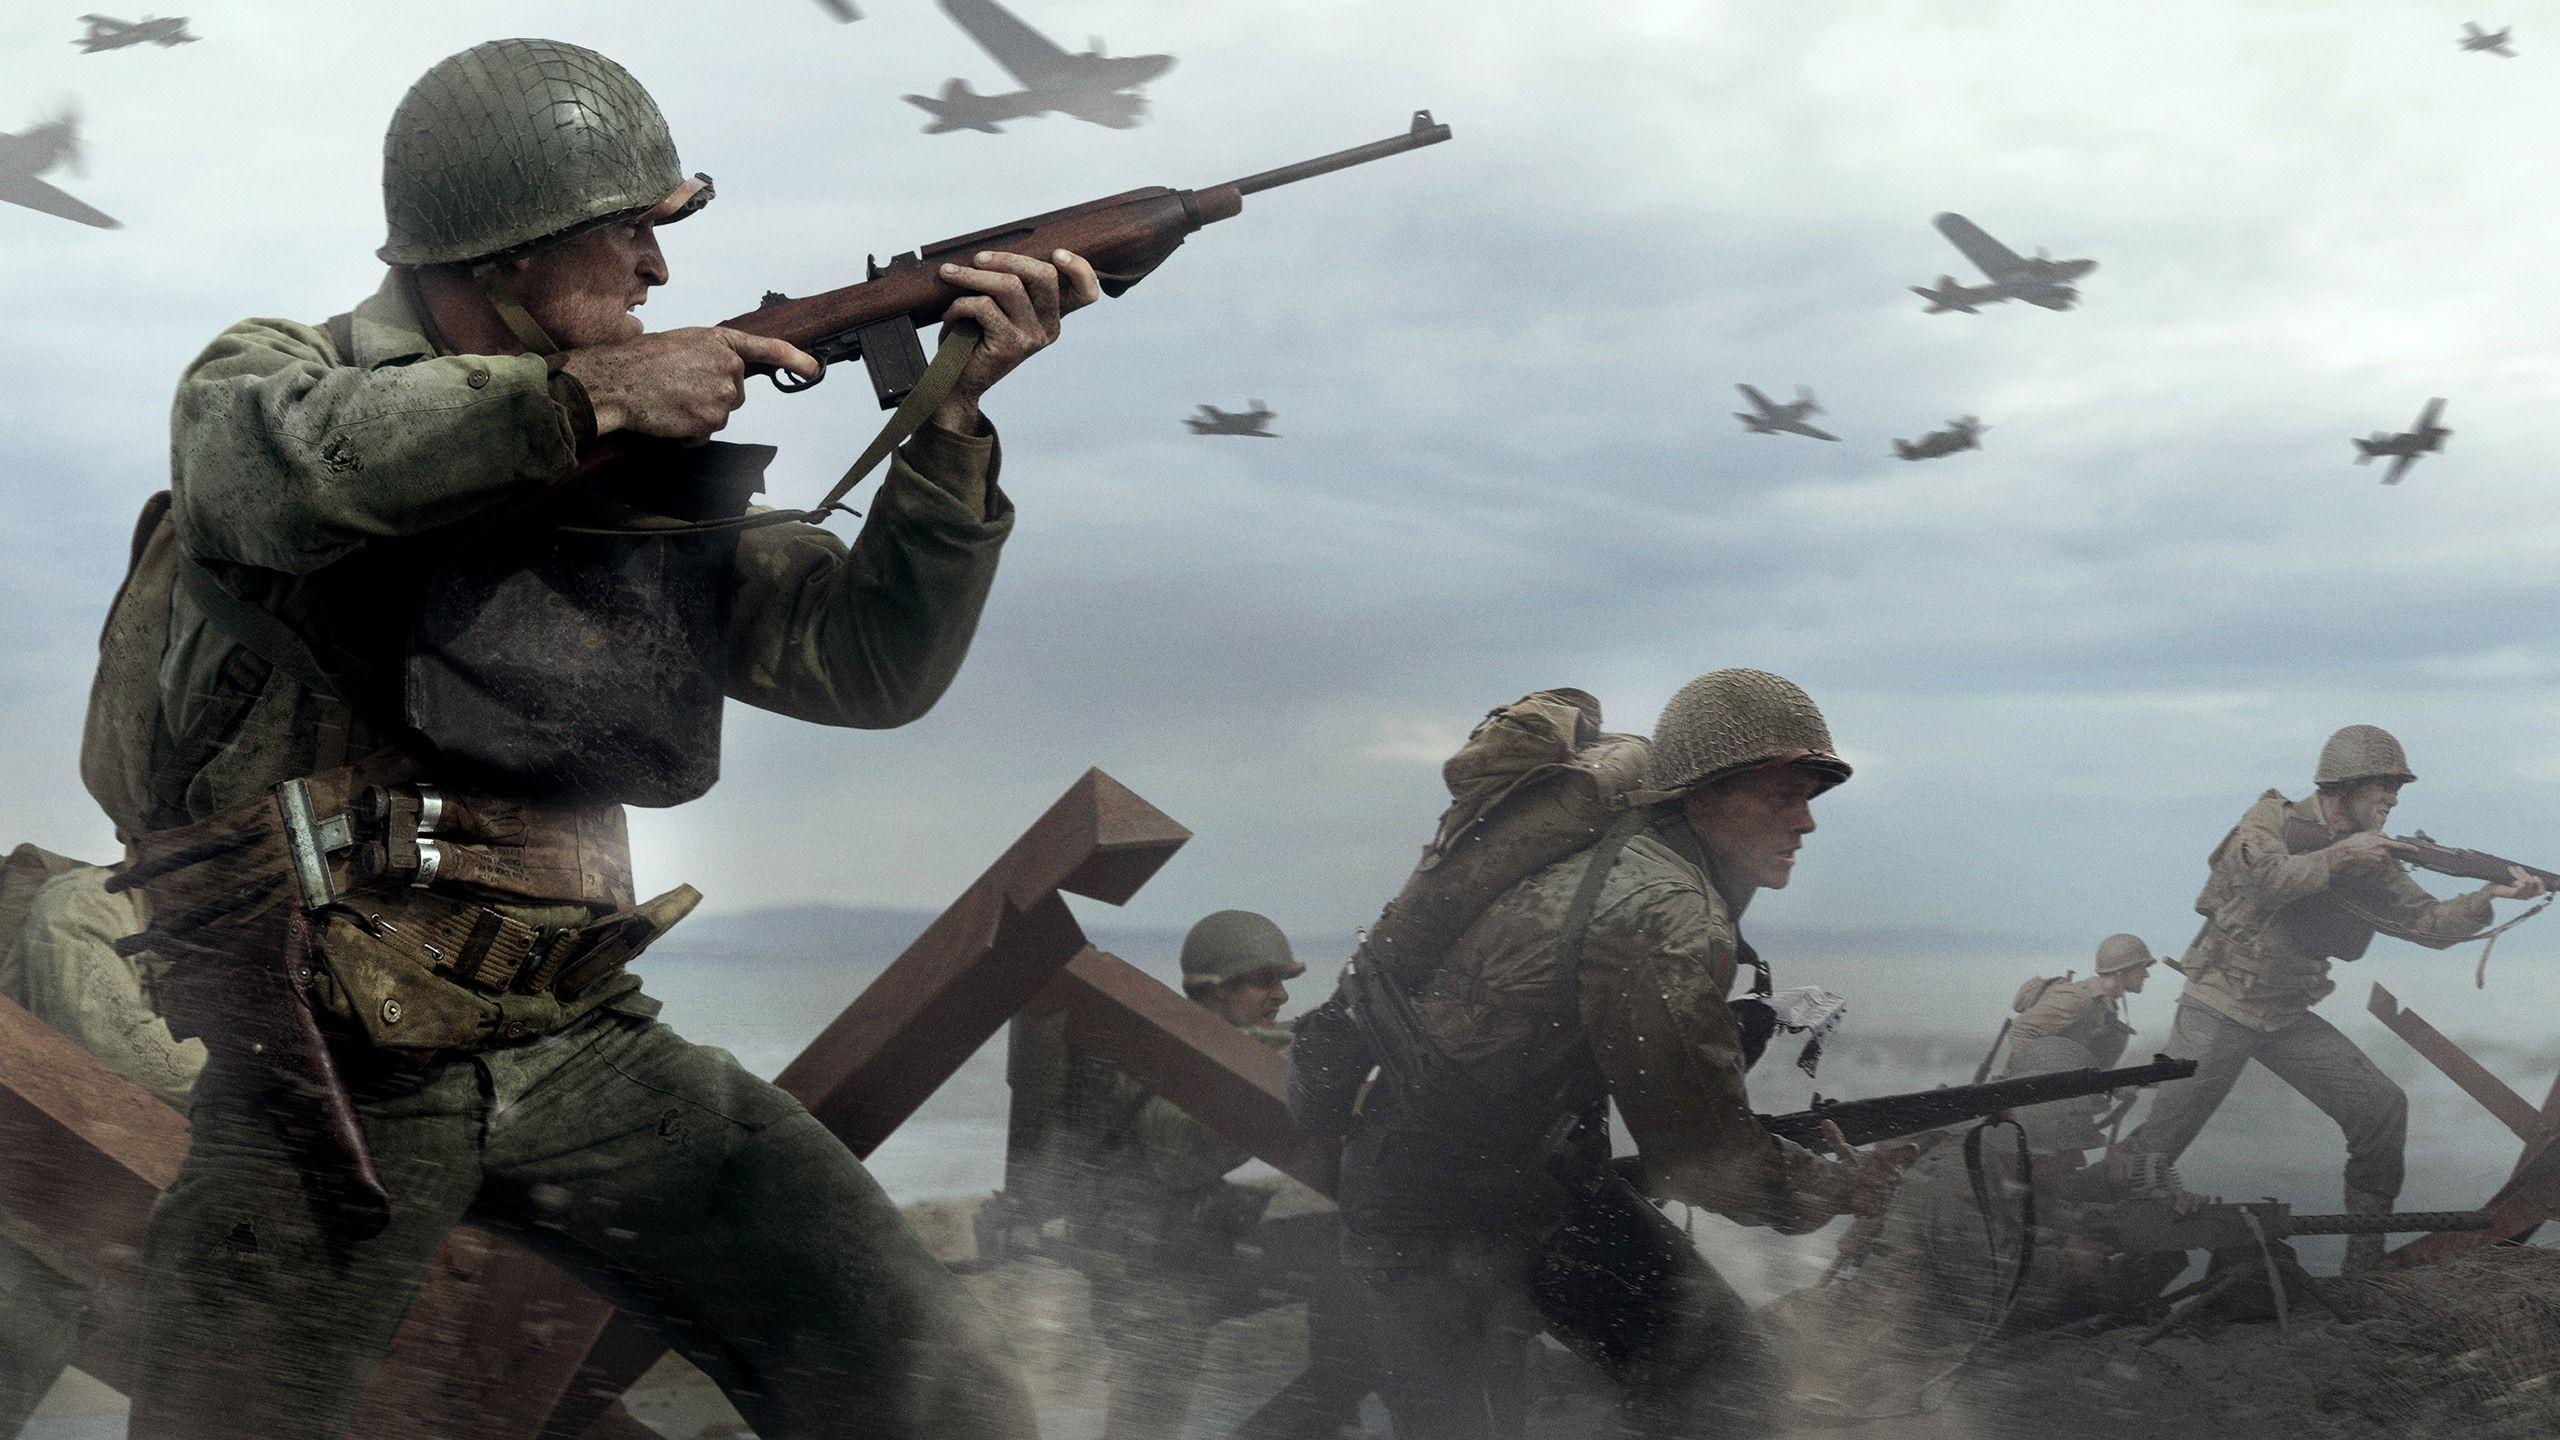 Awesome Call of Duty: WWII Soldiers in War wallpaper. WW2 reference